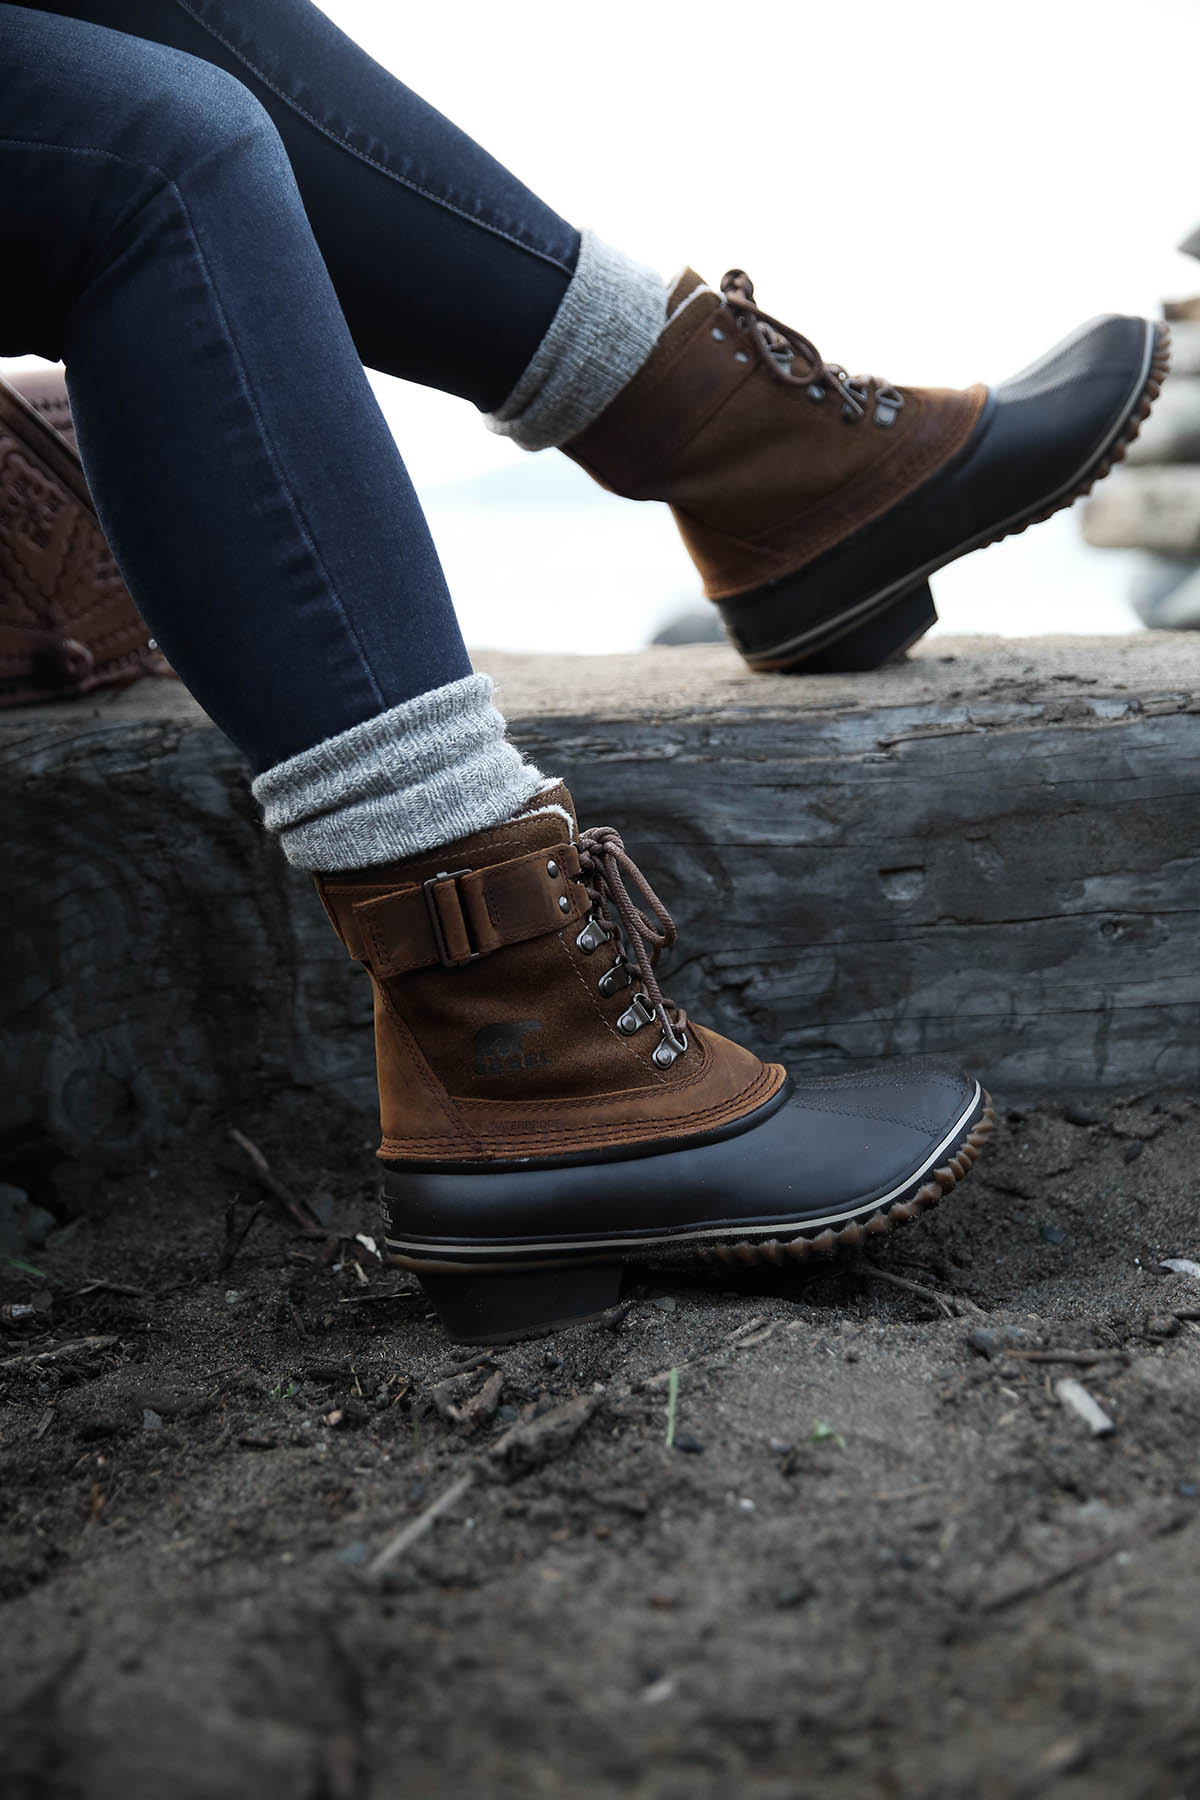 sorel boots with socks and jeans